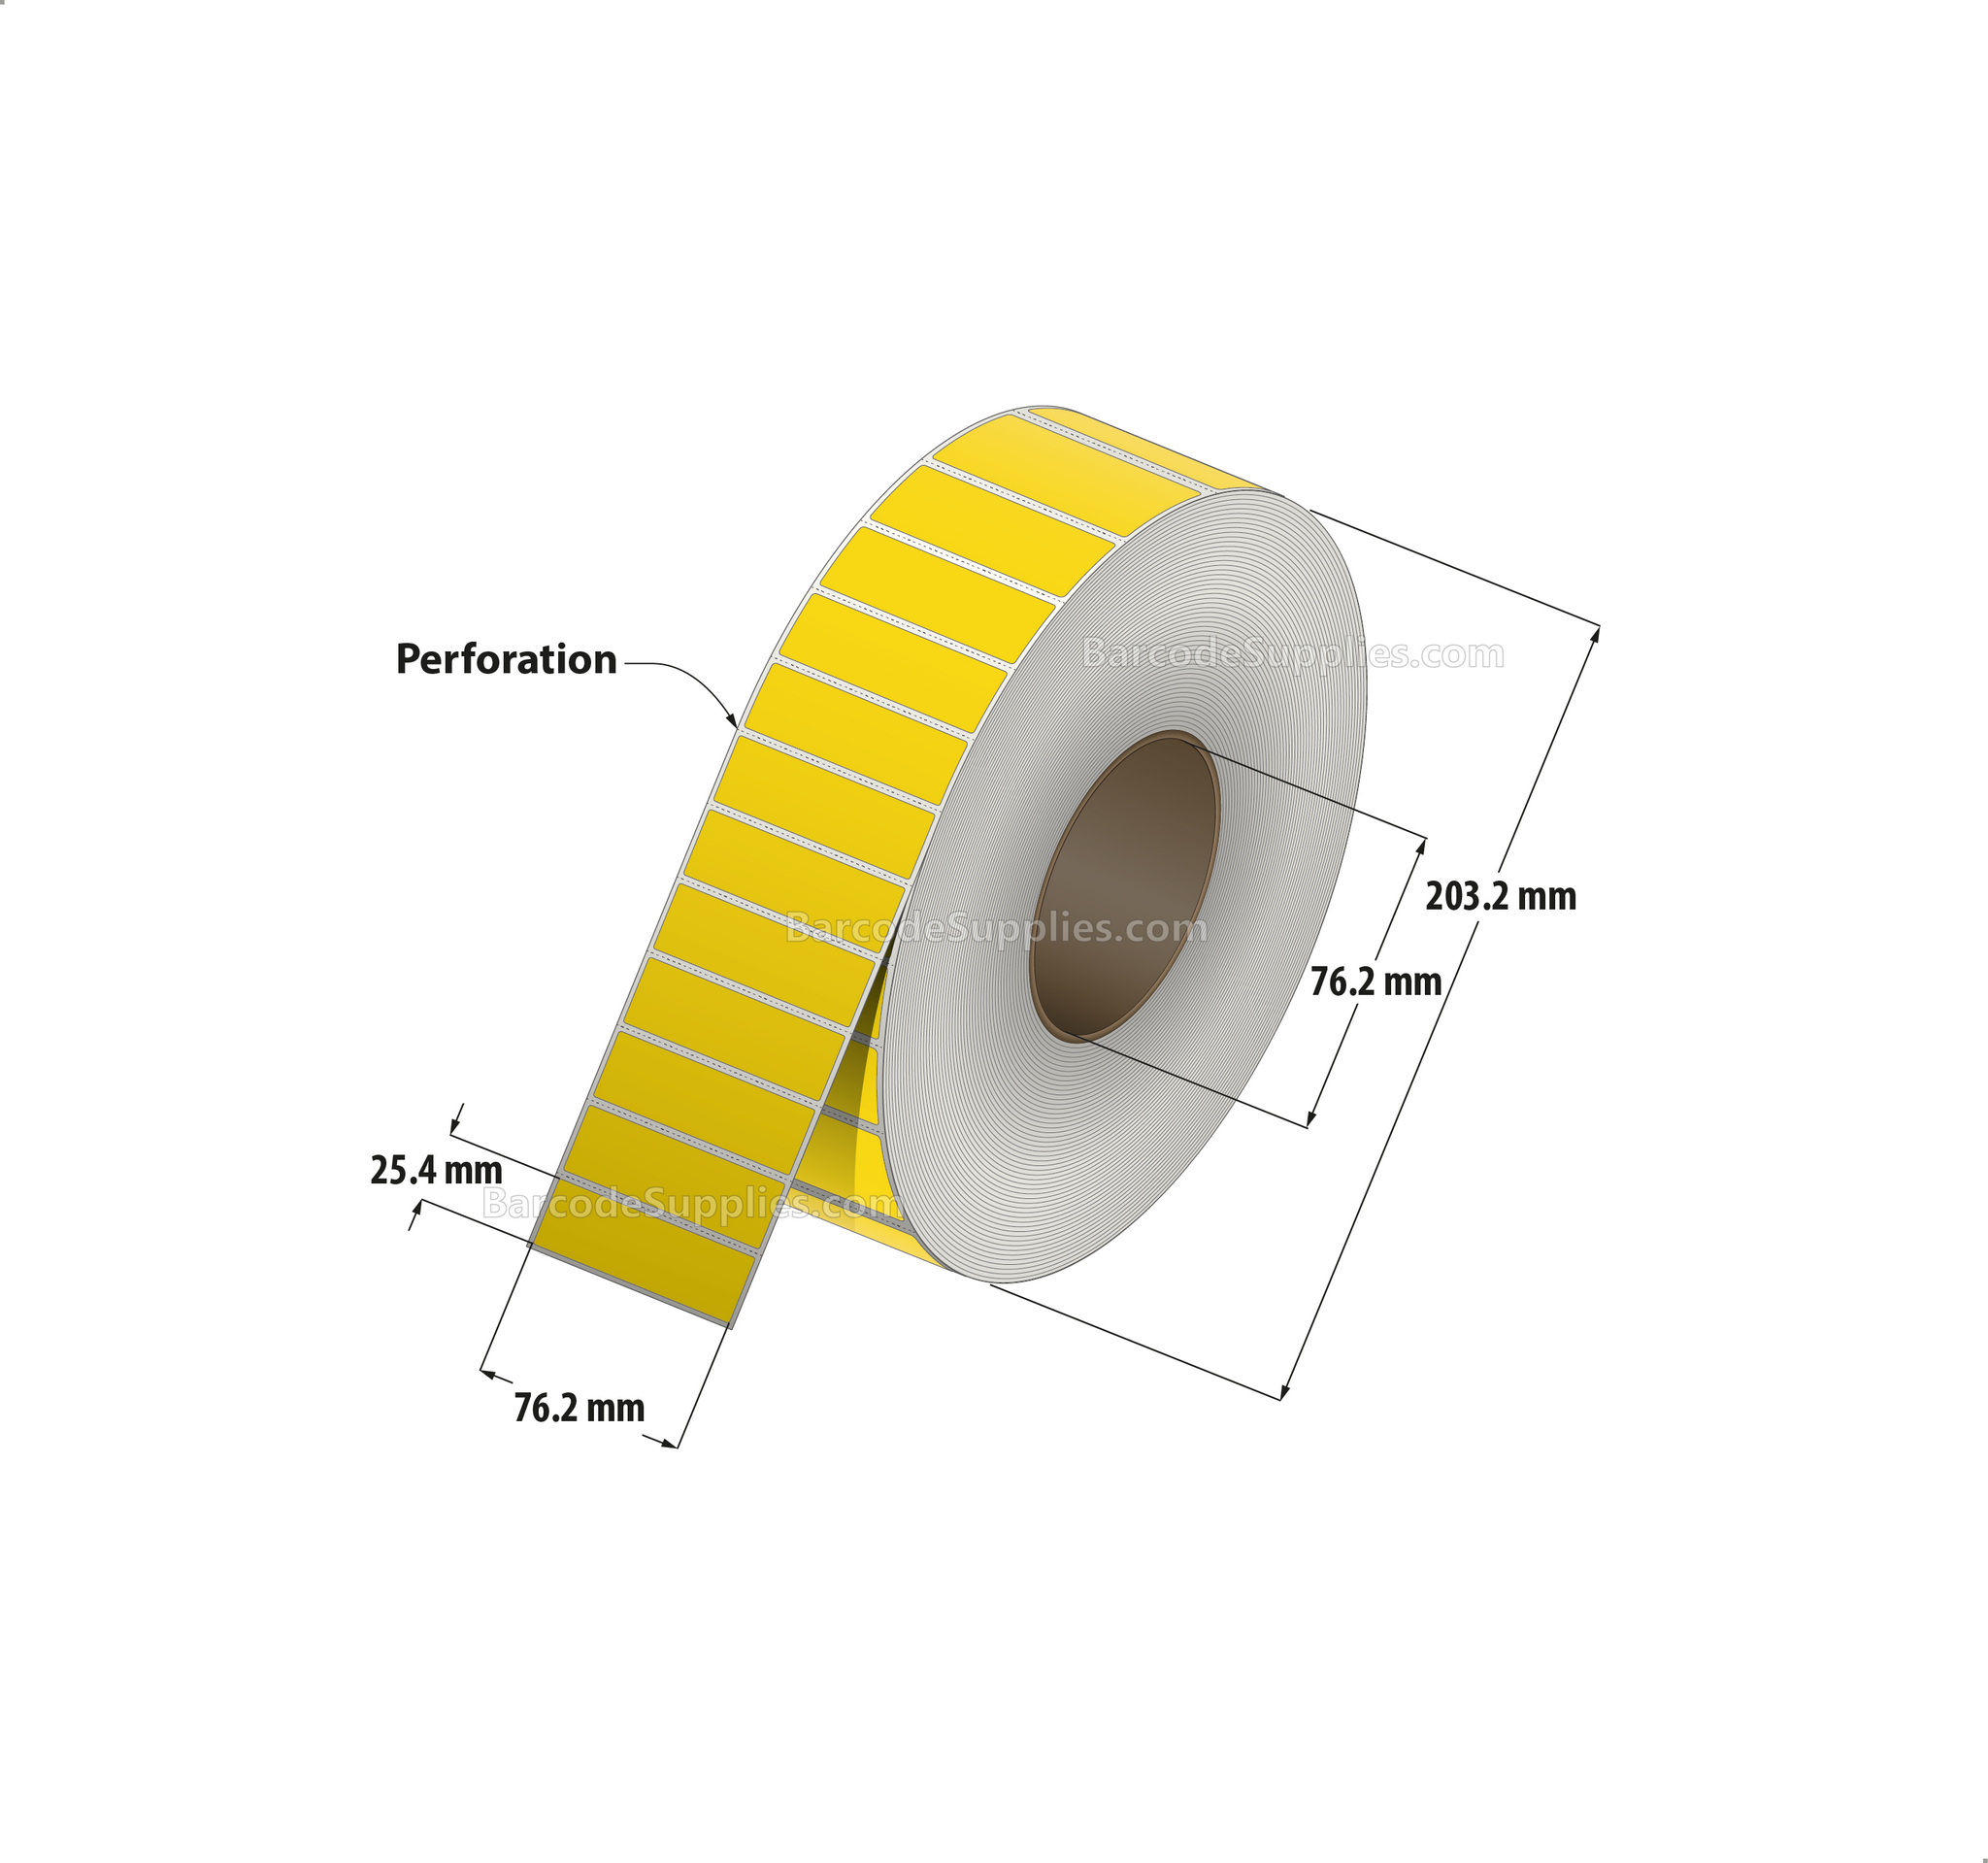 3 x 1 Thermal Transfer Pantone Yellow Labels With Permanent Adhesive - Perforated - 5500 Labels Per Roll - Carton Of 8 Rolls - 44000 Labels Total - MPN: RFC-3-1-5500-YL